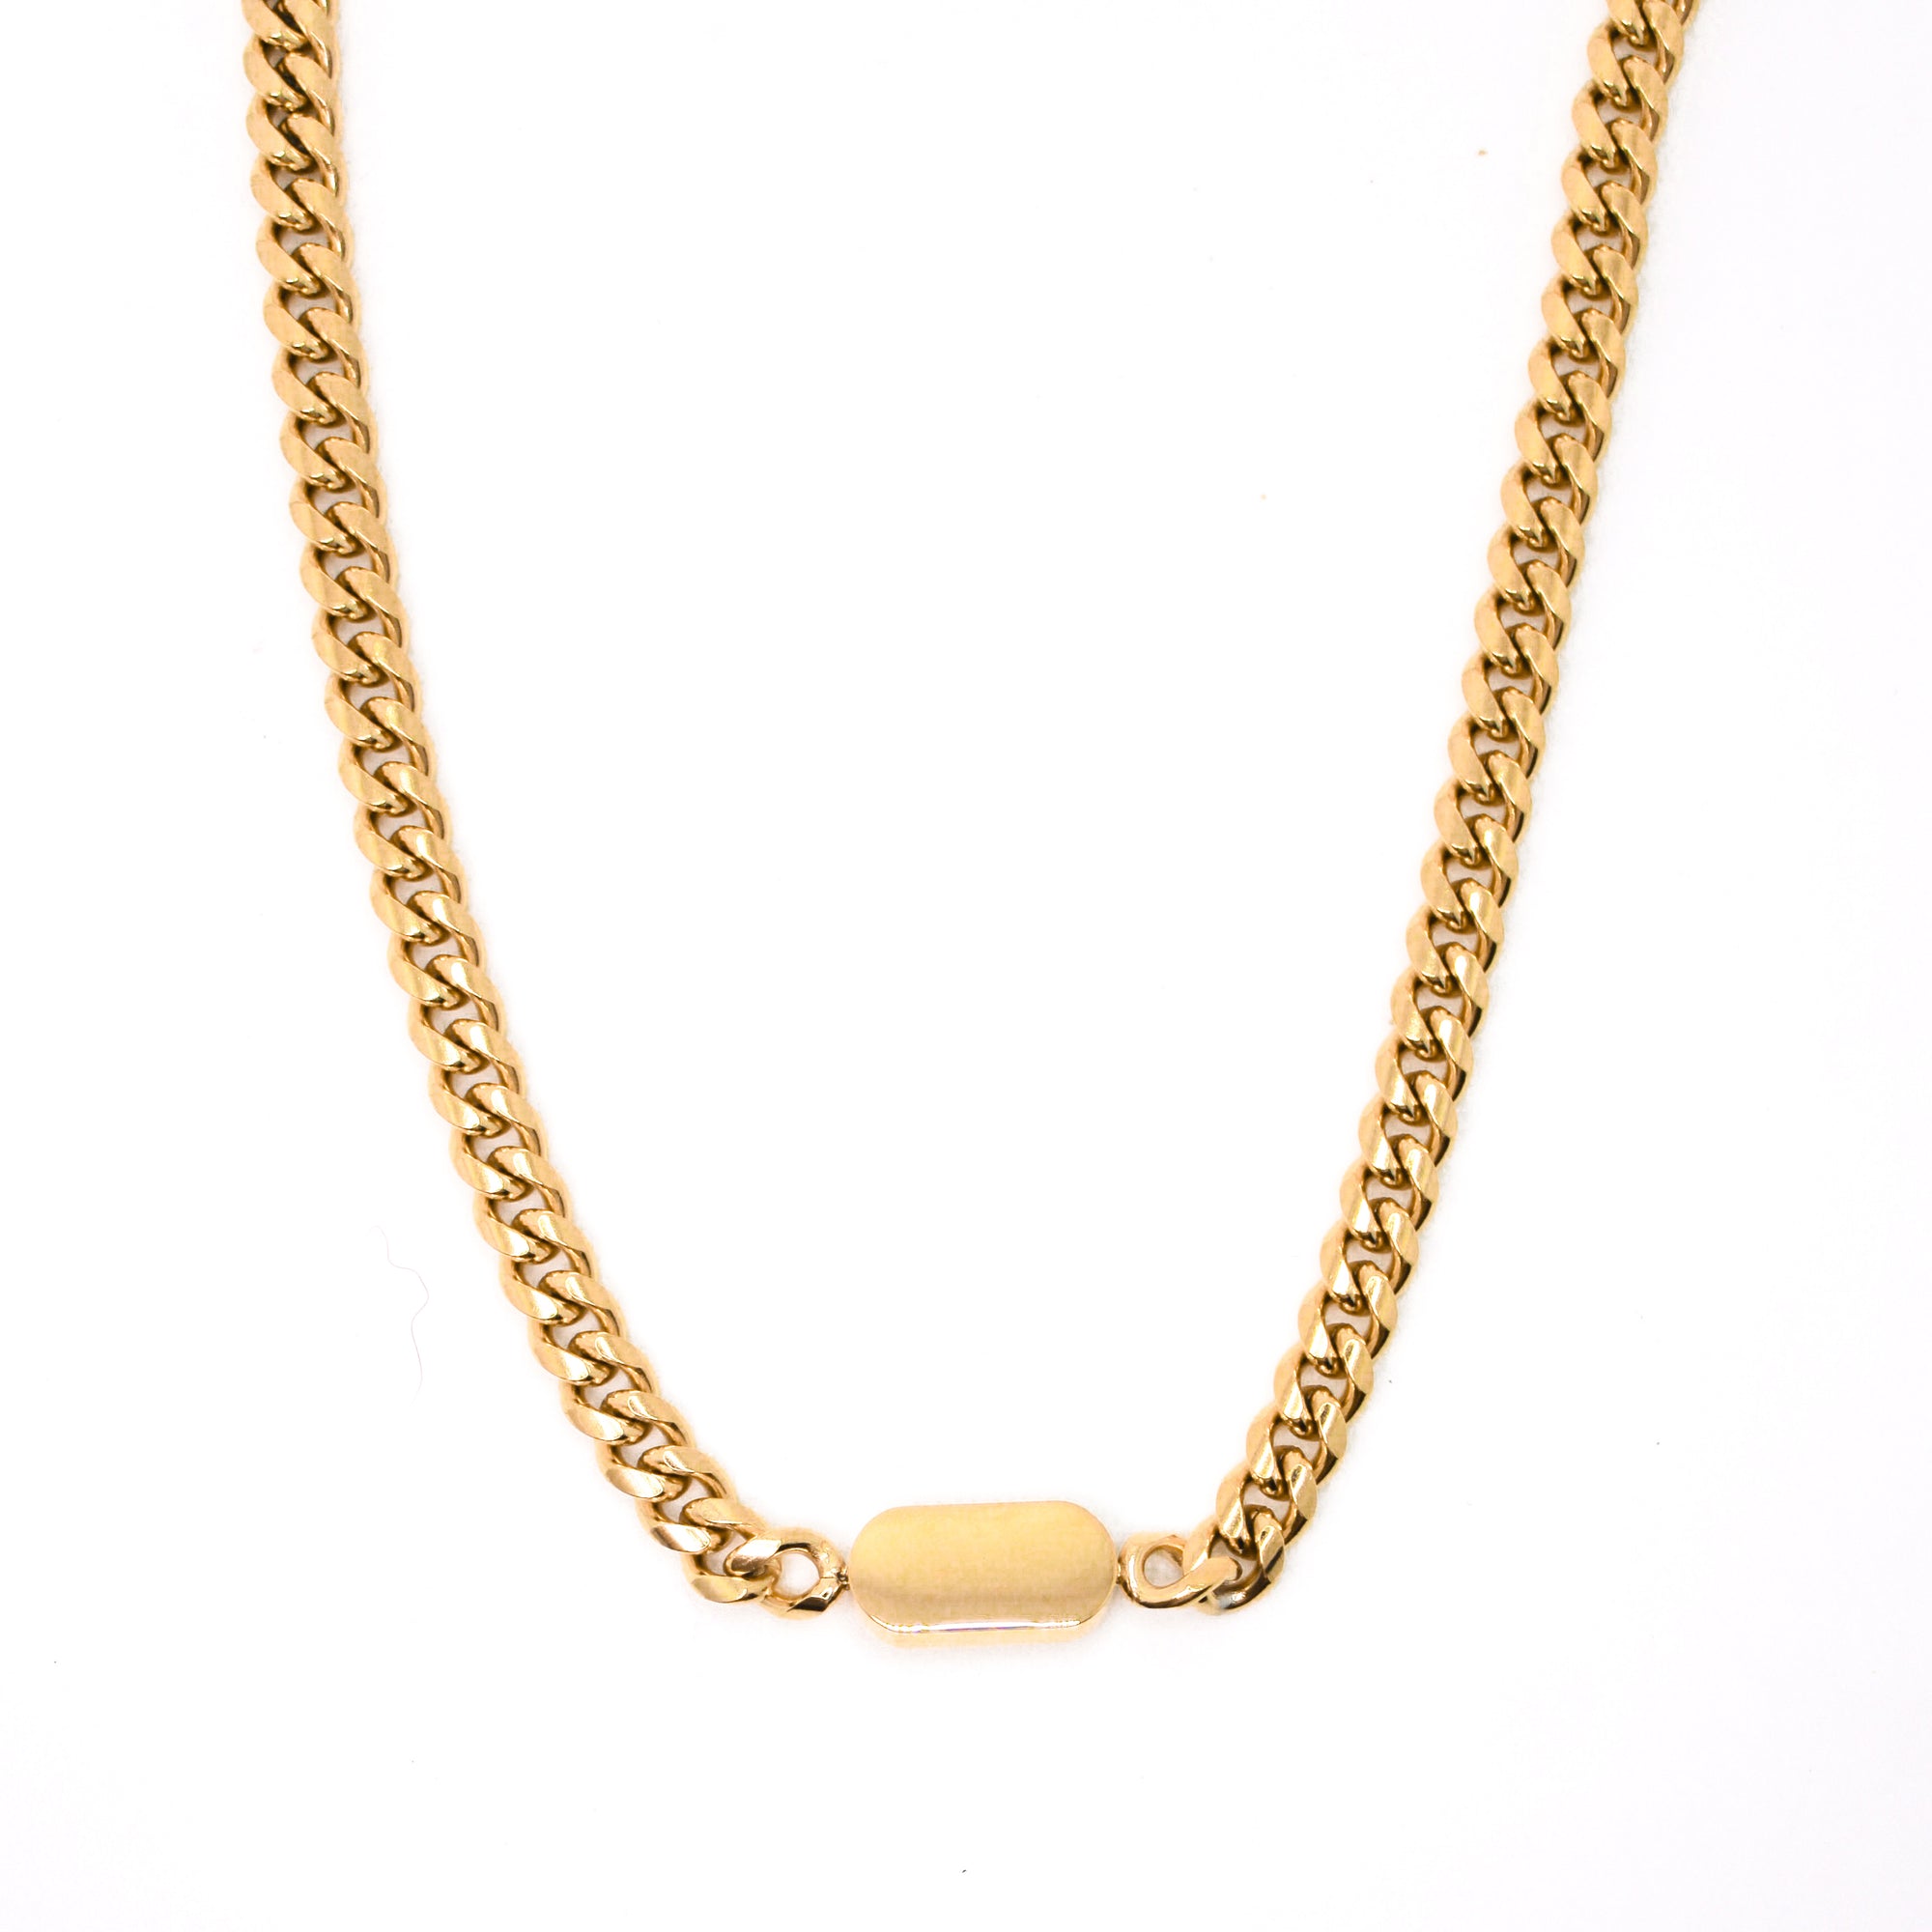 Miami Vibes Necklace - For the Girls Jewelry